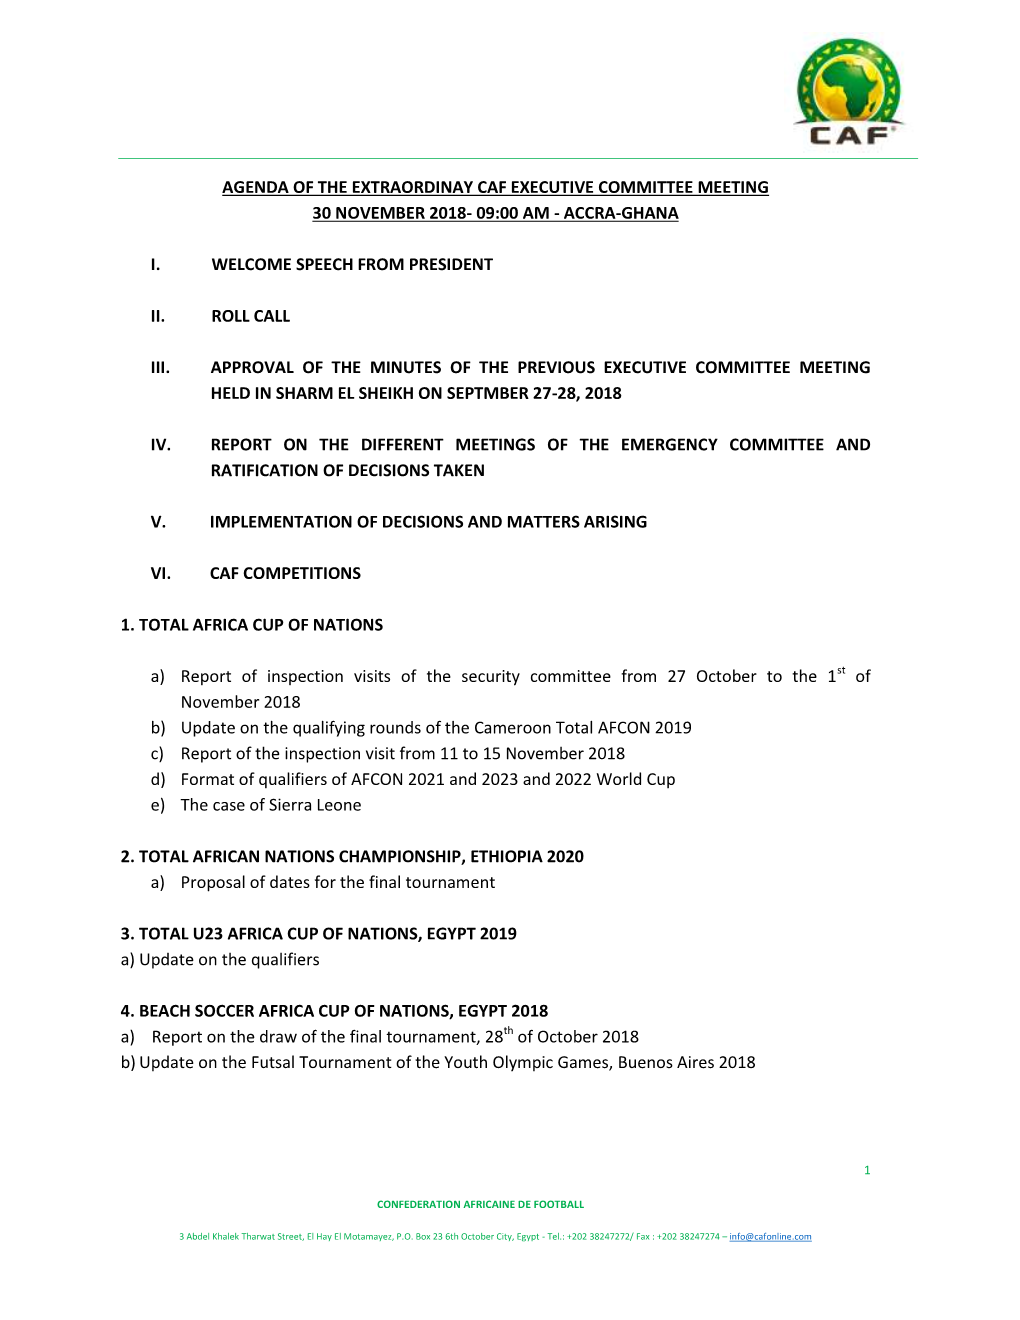 Agenda of the Extraordinay Caf Executive Committee Meeting 30 November 2018- 09:00 Am - Accra-Ghana